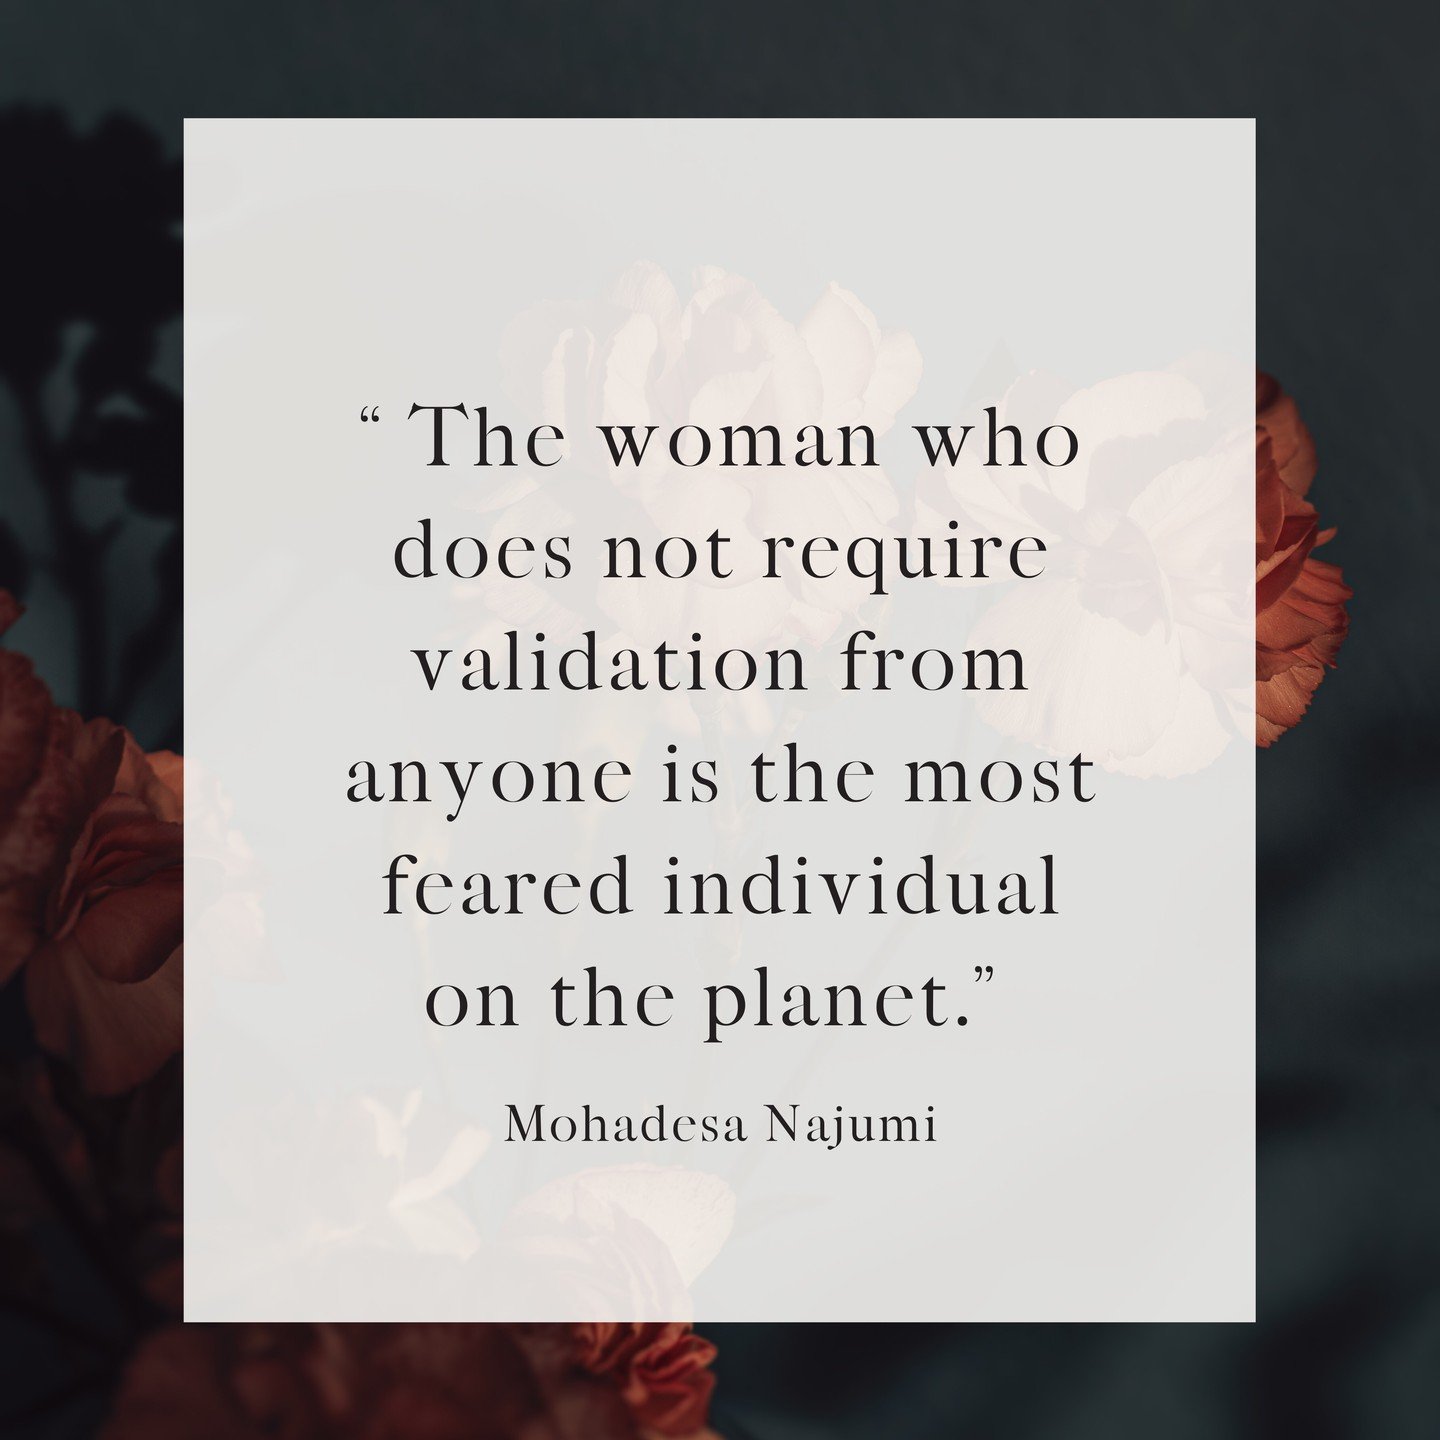 &quot;This week, I invite you to focus on validating yourself opposed to seeking validation from those around you. Compliment yourself! Let's lean into the idea that, especially as women, the relationship we have with ourselves comes before all other